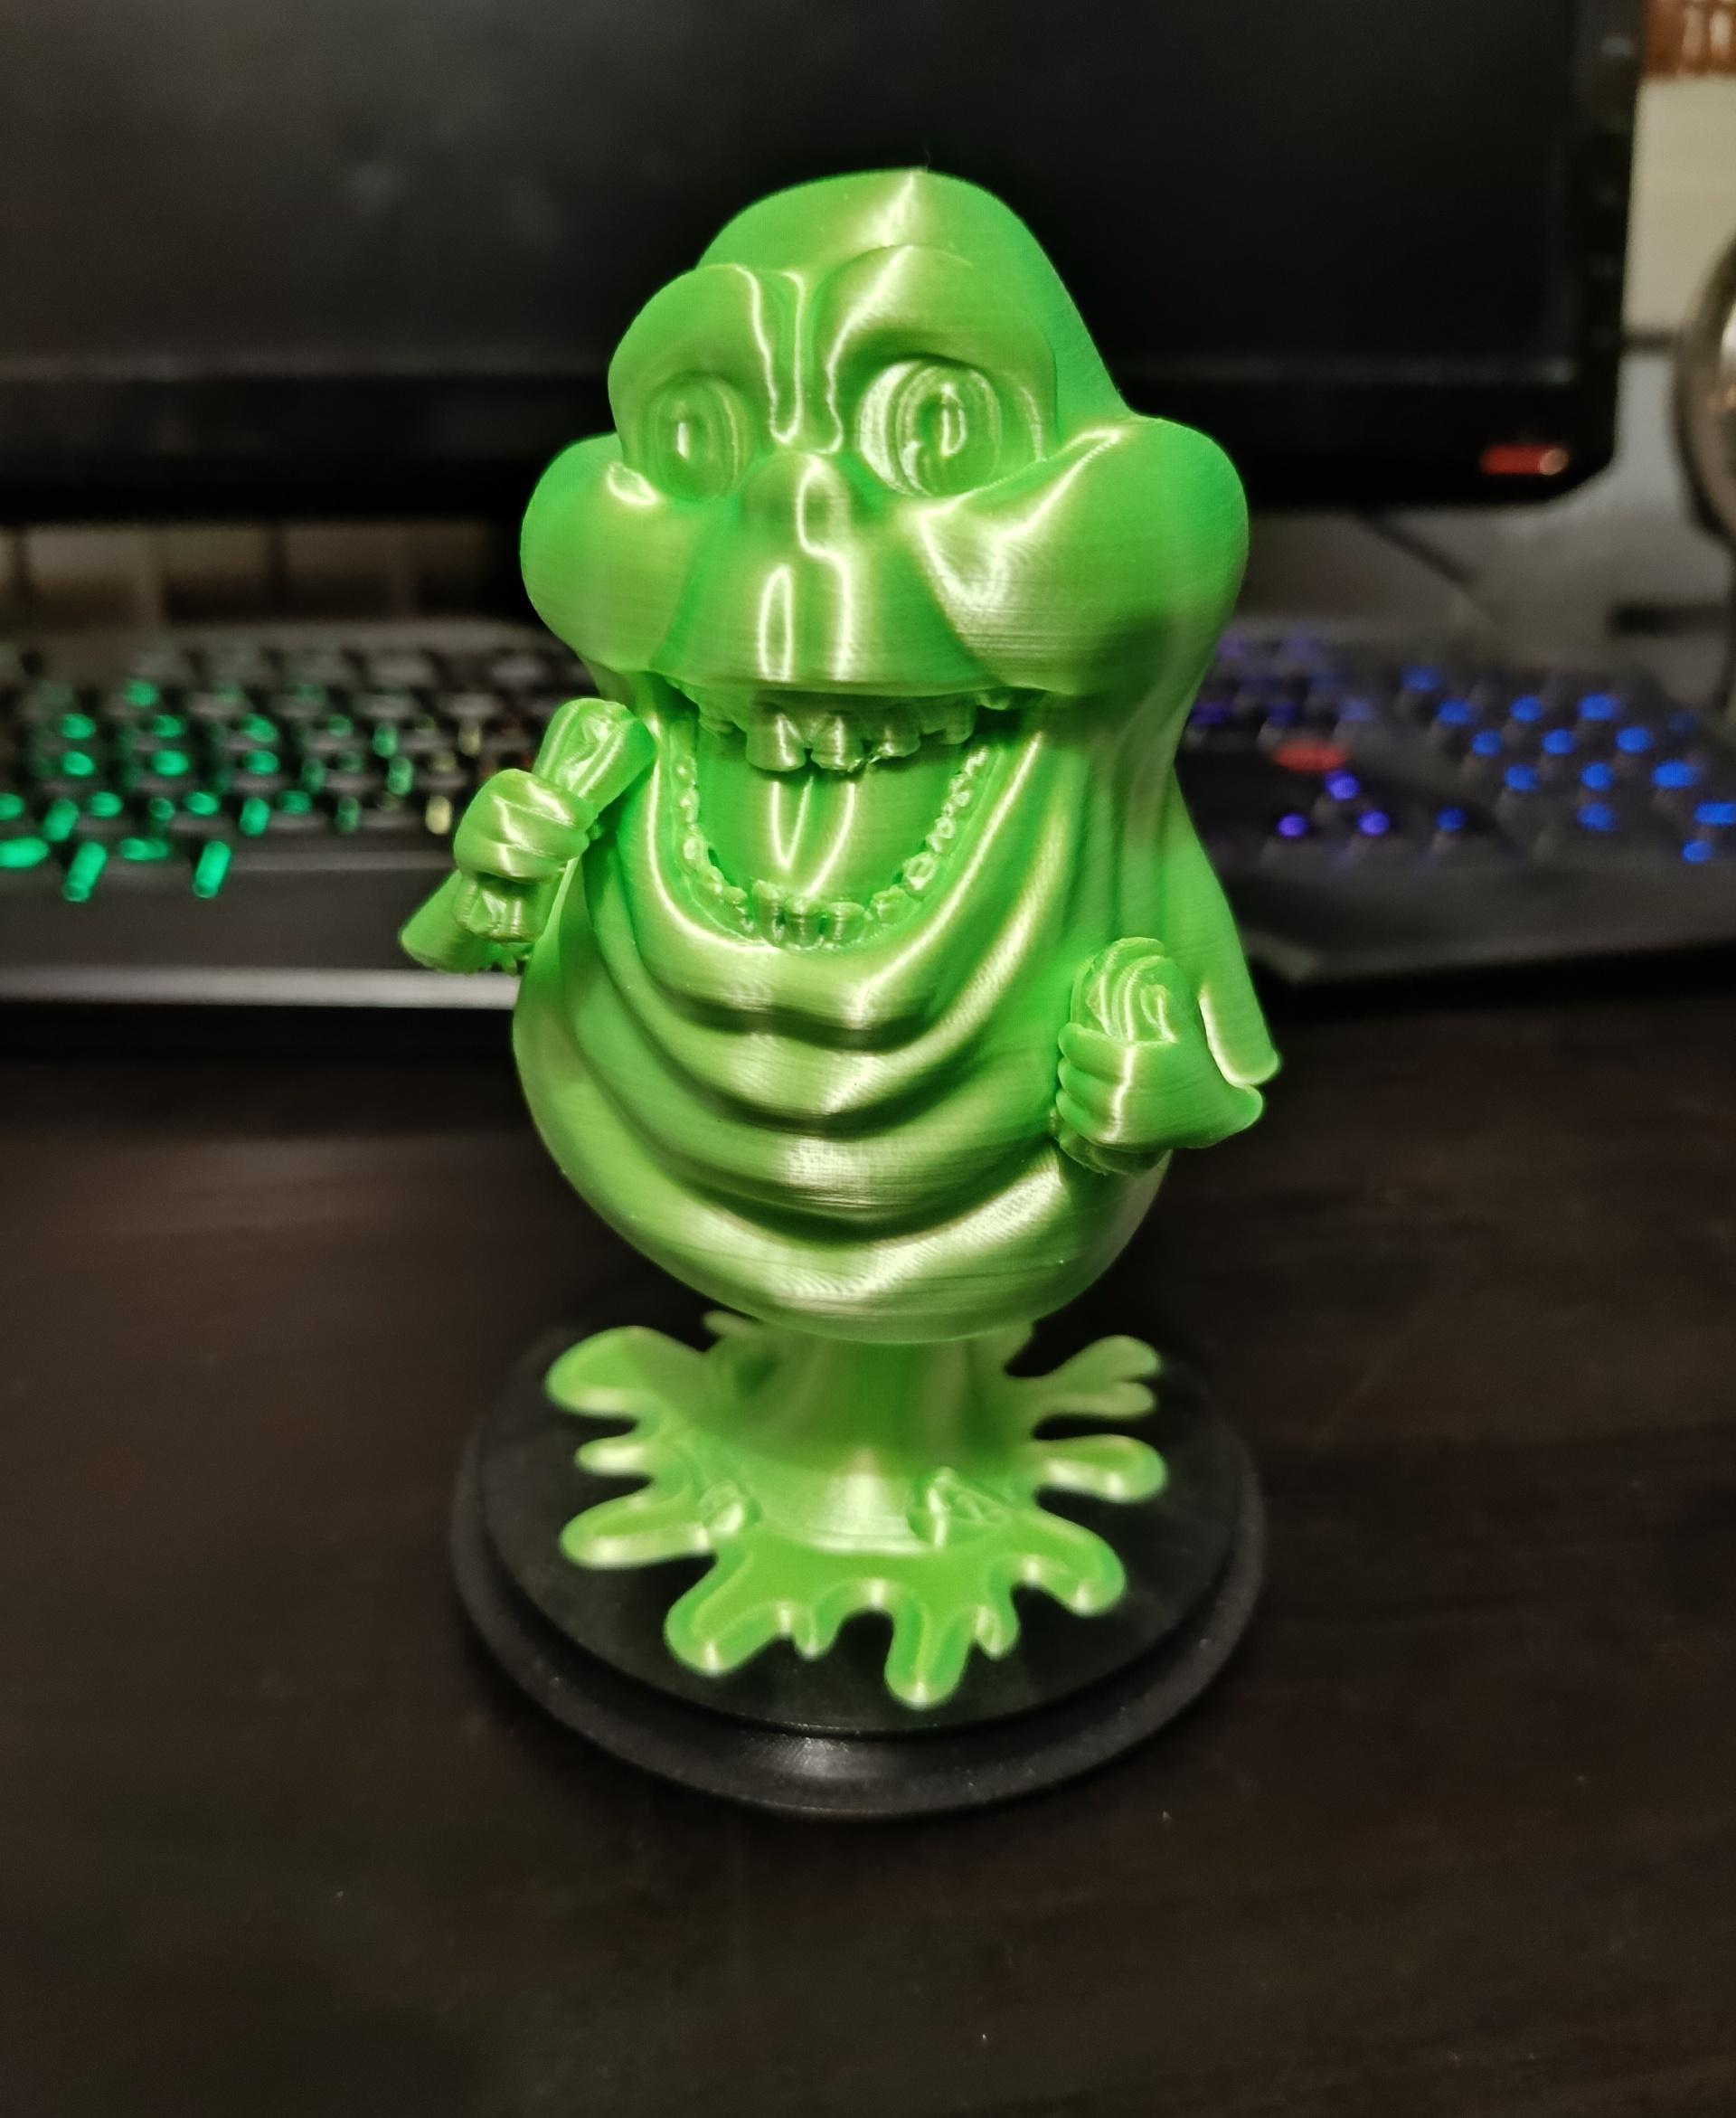 Little Big Head- Slimer (Ghostbusters) - Little Big Head Slimer from Ghostbusters designed by ChelsCCT (ChelseyCreatesThings) and printed by Frikarte3D using Artillery Fluo Green and Geeetech Black PLA filaments. - 3d model